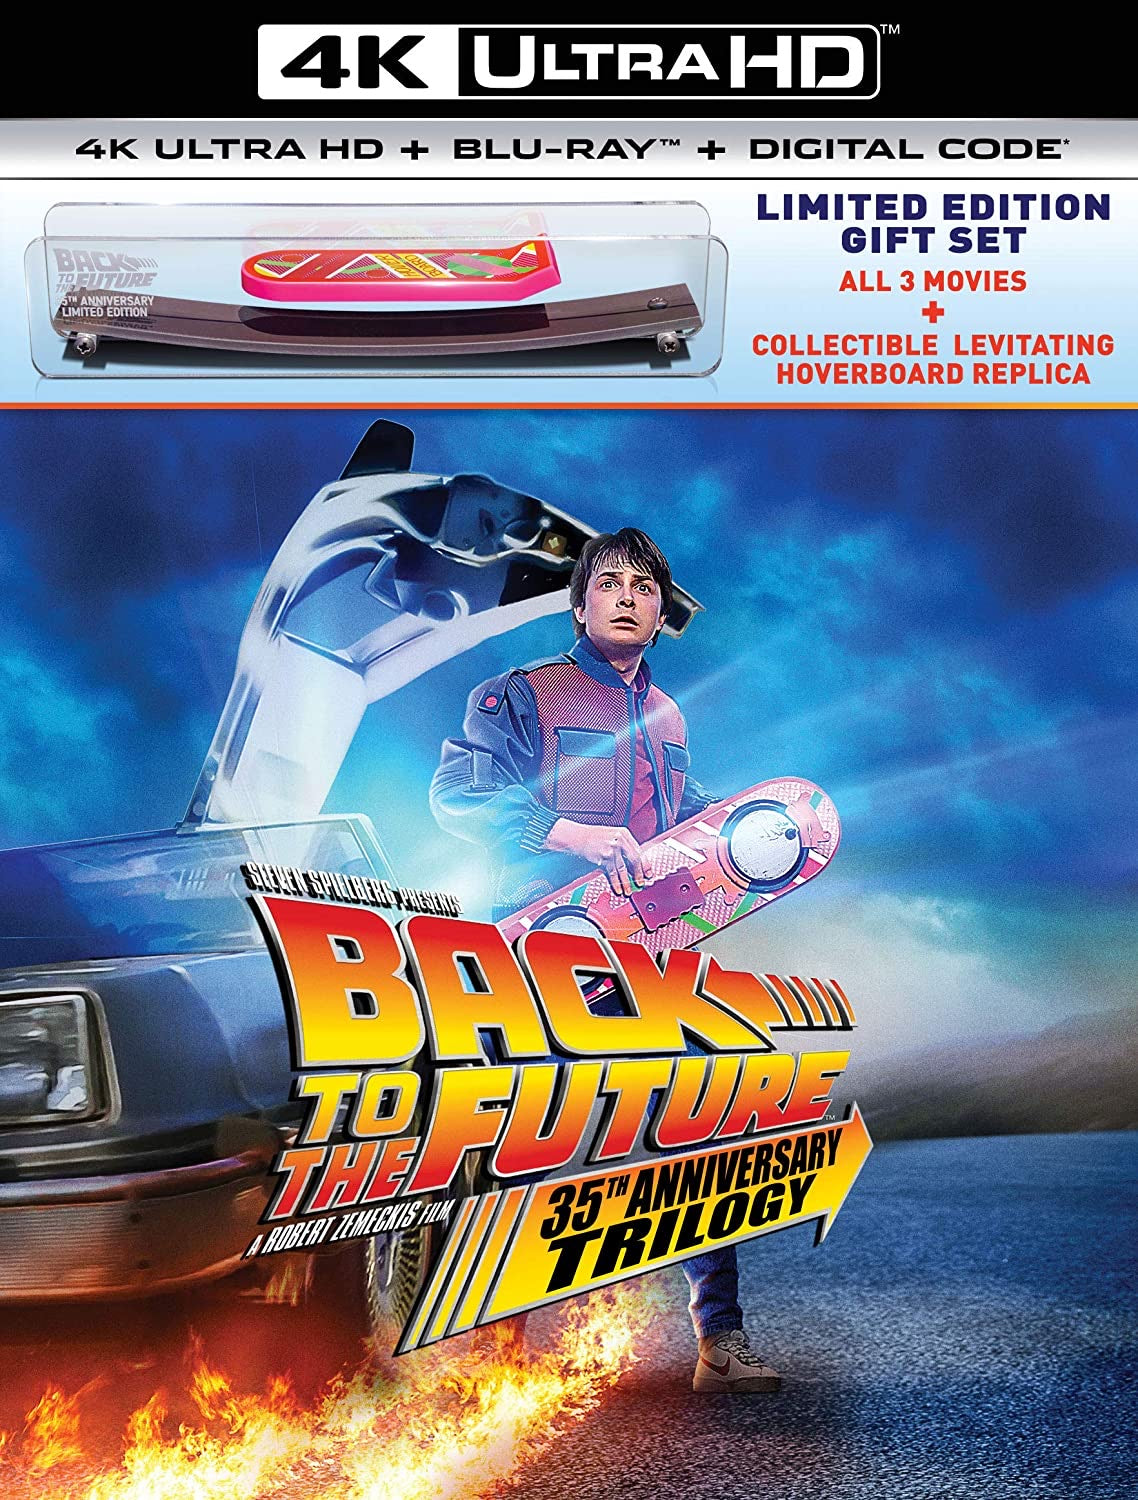 Back To The Future: The Complete Trilogy (1985-1990) Vudu or Movies Anywhere 4K code